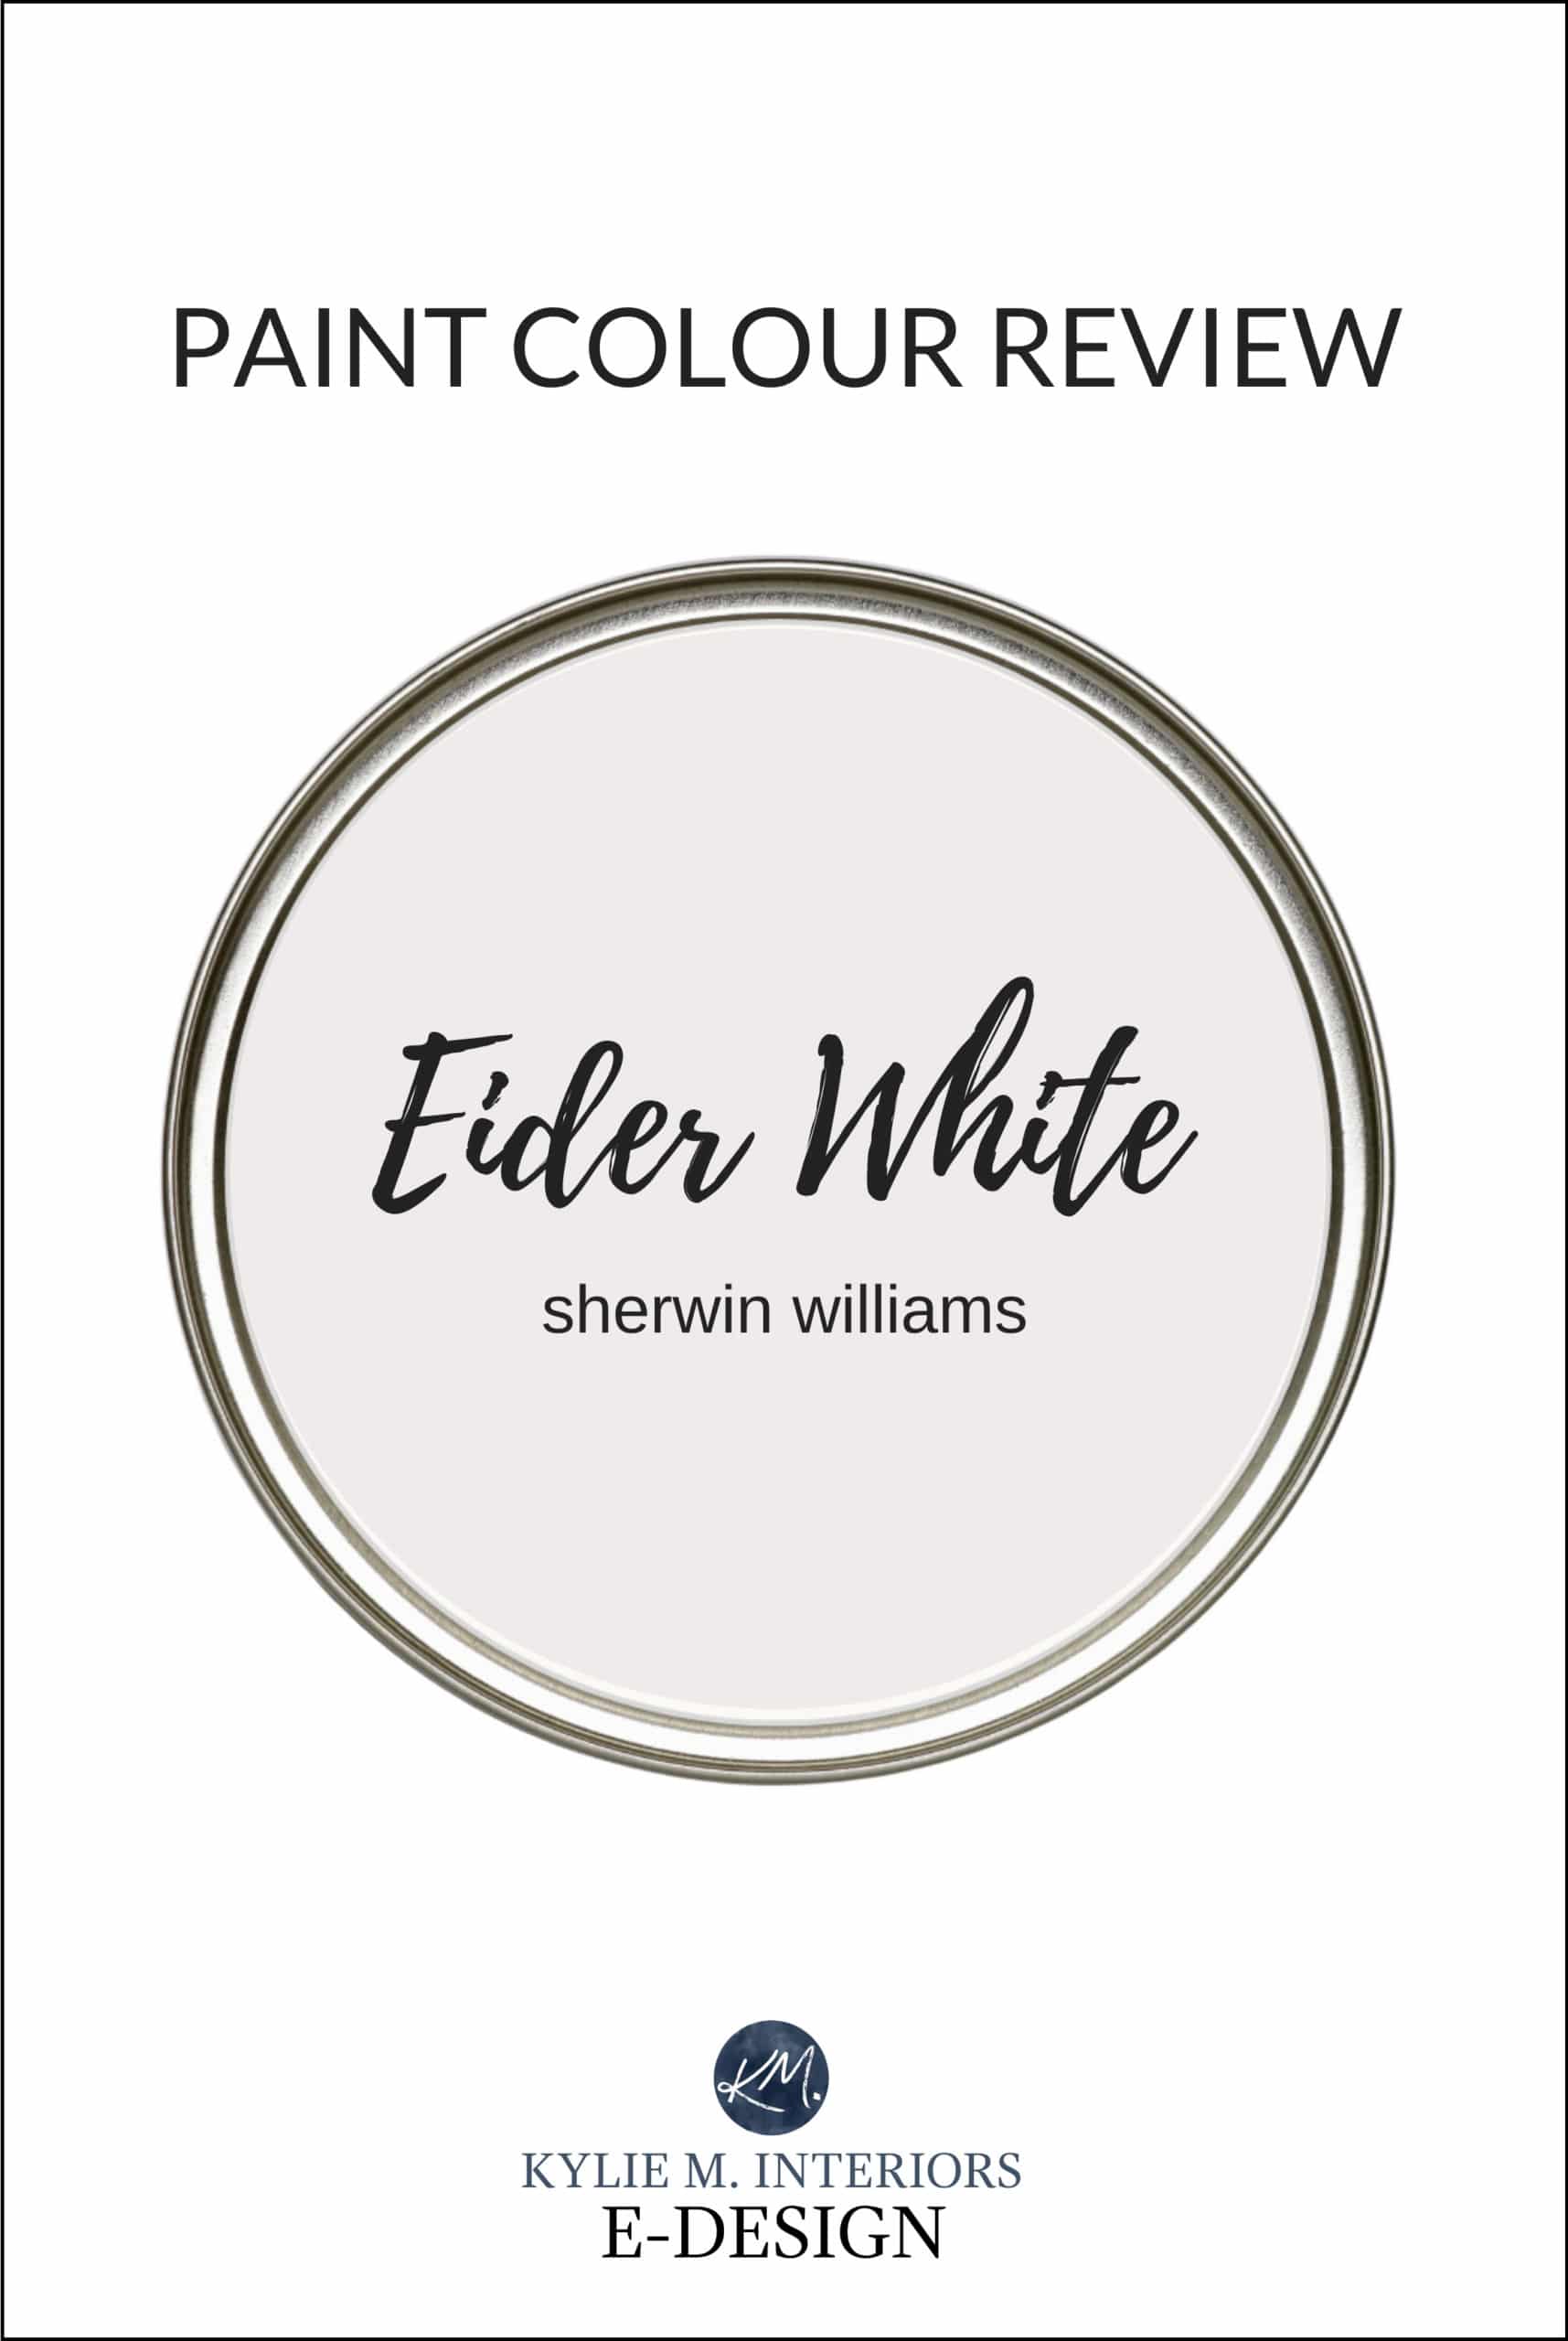 Paint colour review of off white gray paint colour, Sherwin Williams Eider White. Kylie M Interiors Edesign, online paint color consulting and diy decorating design advice blogger